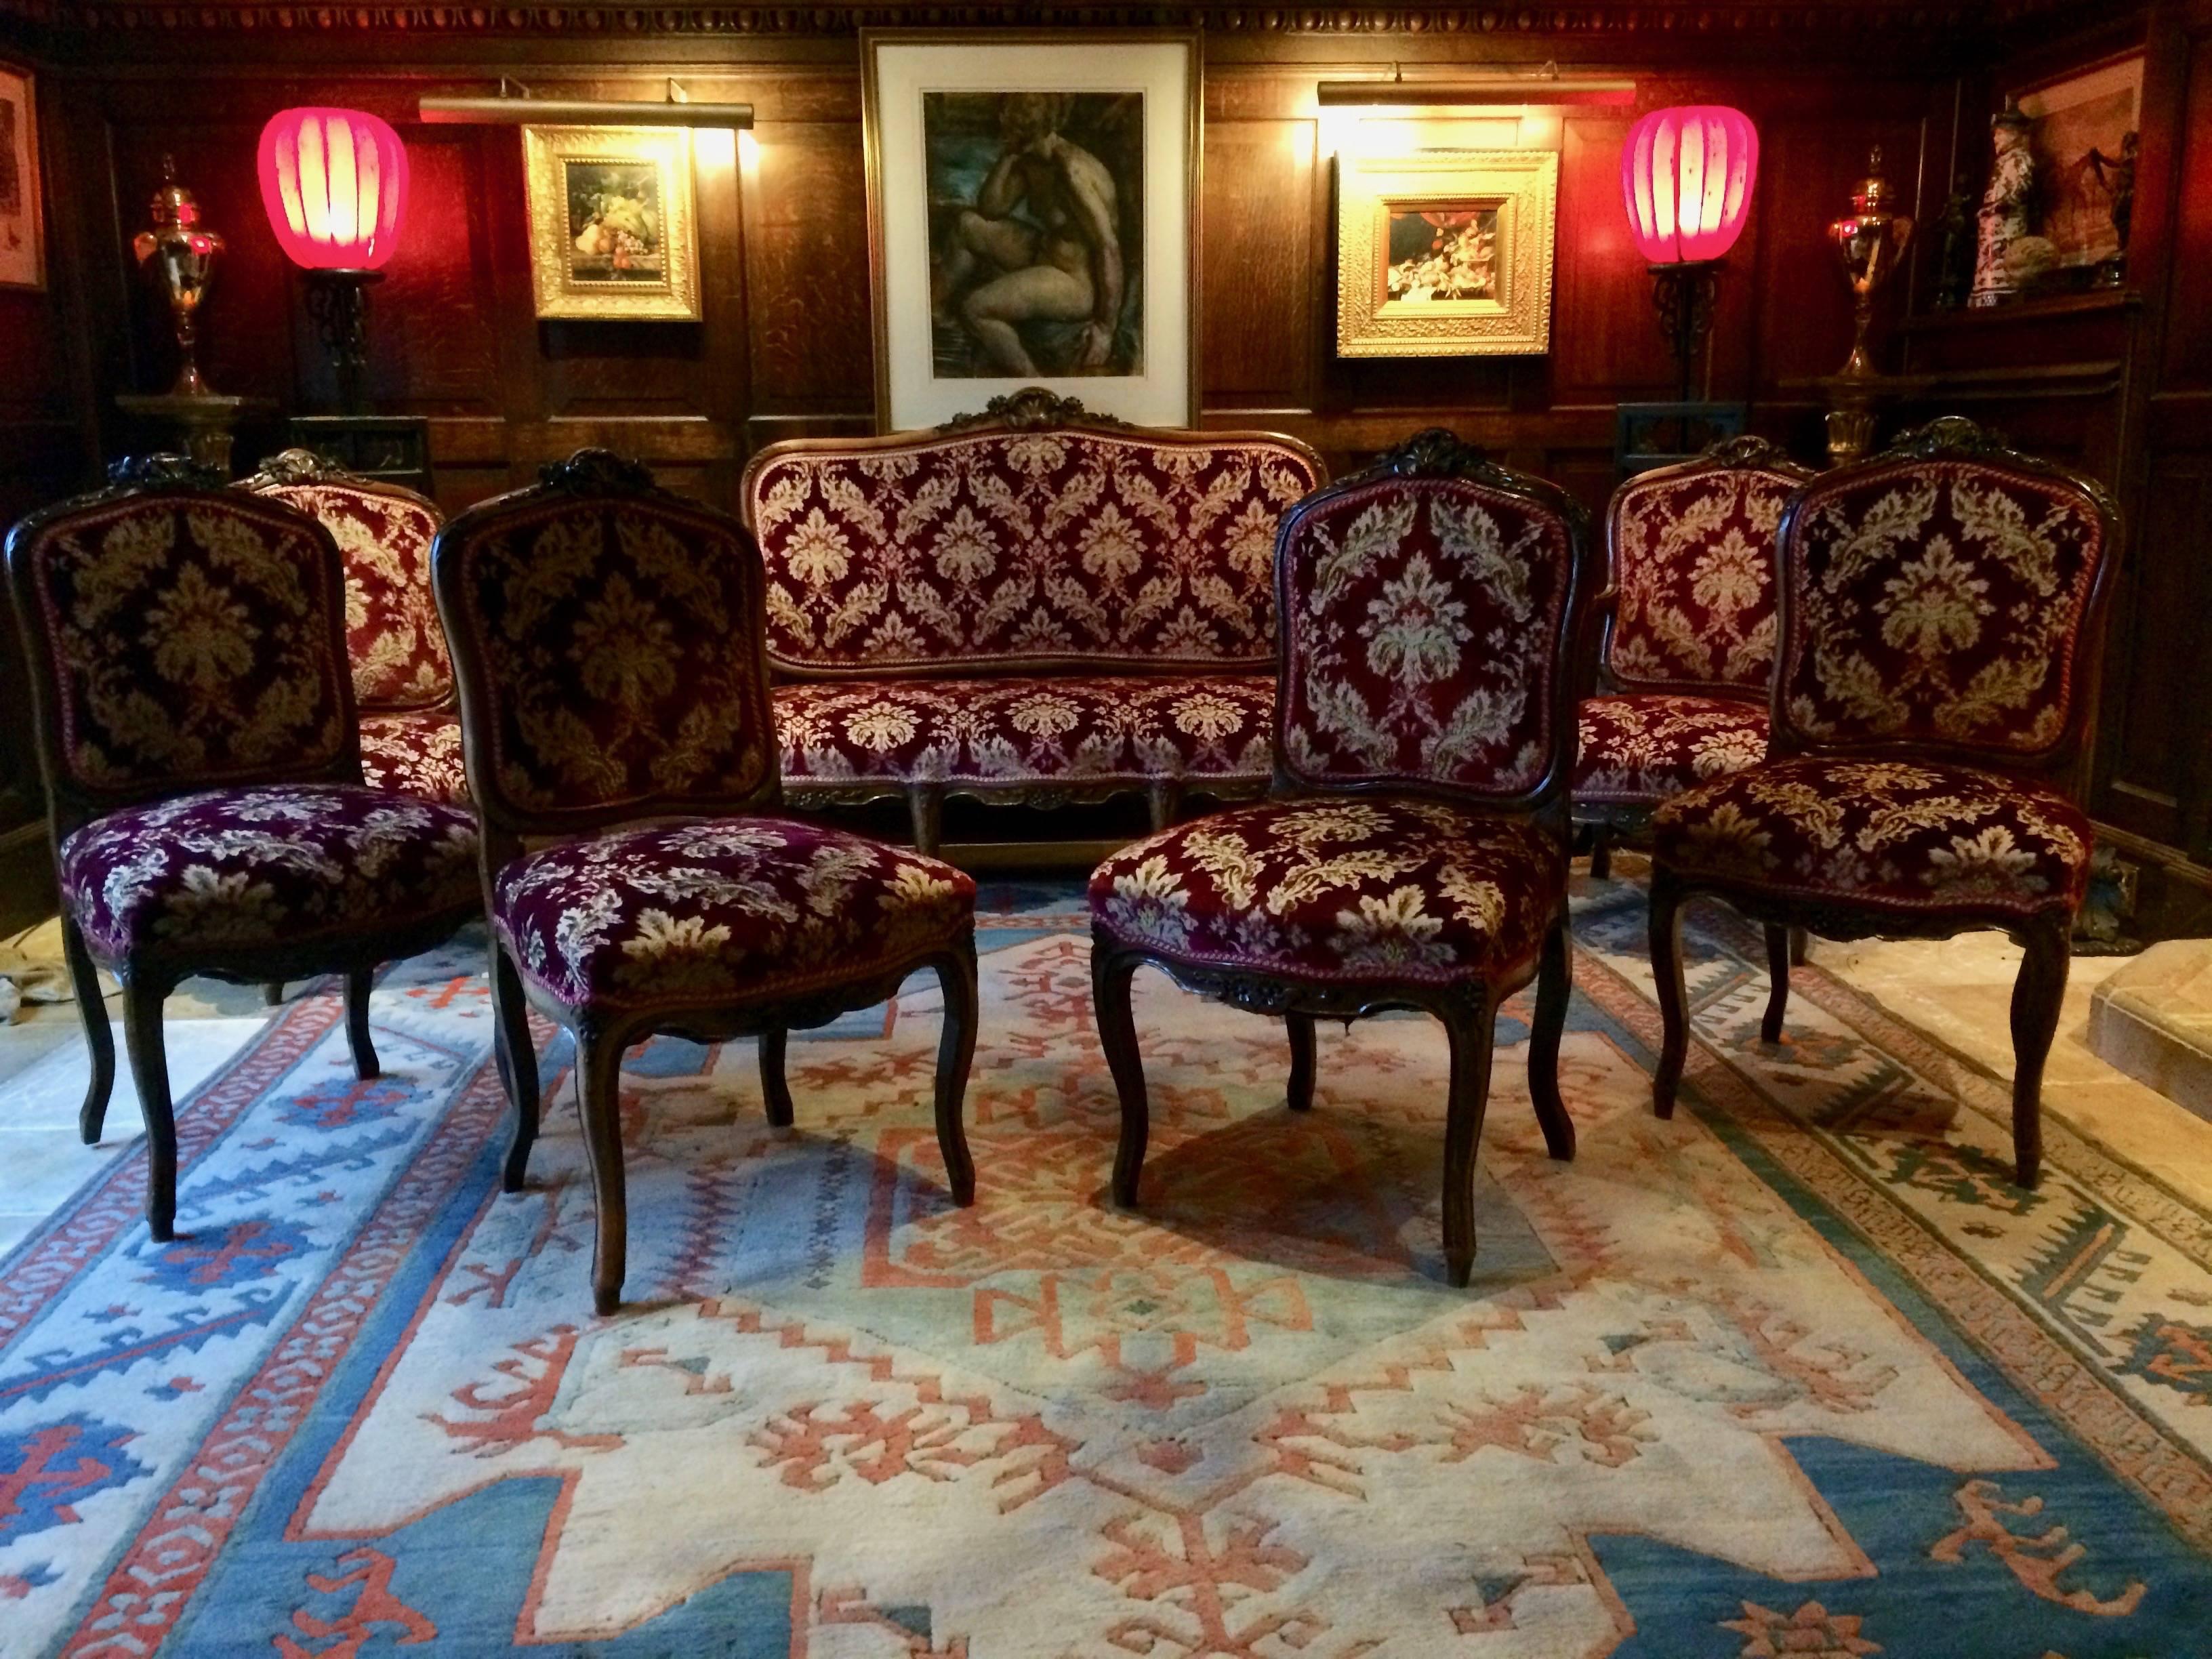 A stunning 19th century Victorian mahogany lounge suite with showood frames, the backs and seats upholstered in damask, comprising a canape, pair of armchairs and four side chairs

Antique
19th century
Salon suite
Seven pieces
Canape sofa
Two